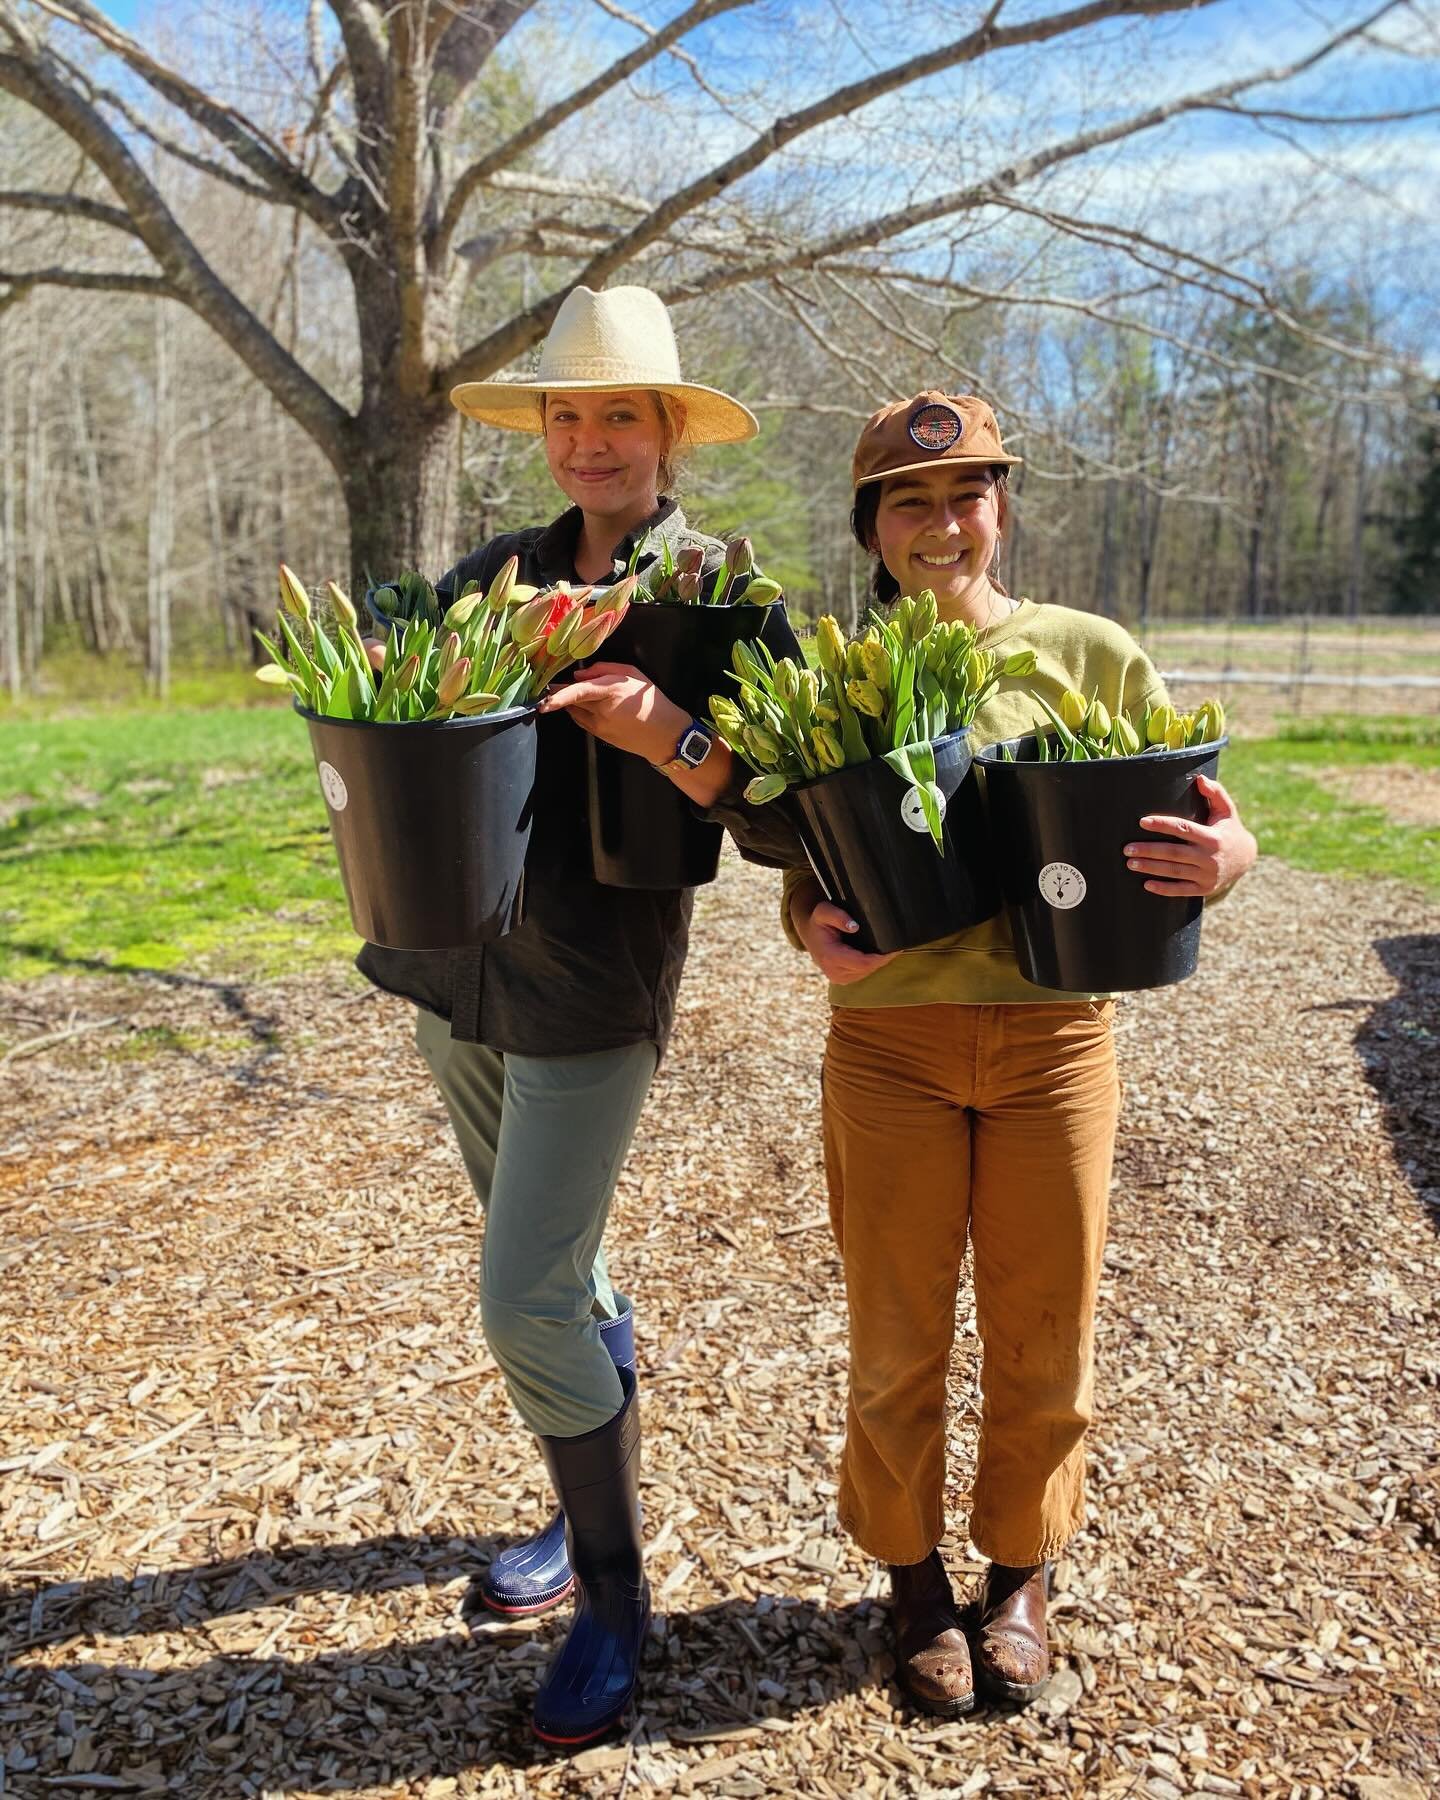 We are excited to have Kate and Grace #wwoofing here on the farm from California this week. They have been learning how to harvest tulips, ride in Blanchette, help pack the dahlia tubers so they are ready to plant in June, and dig quackgrass out of b